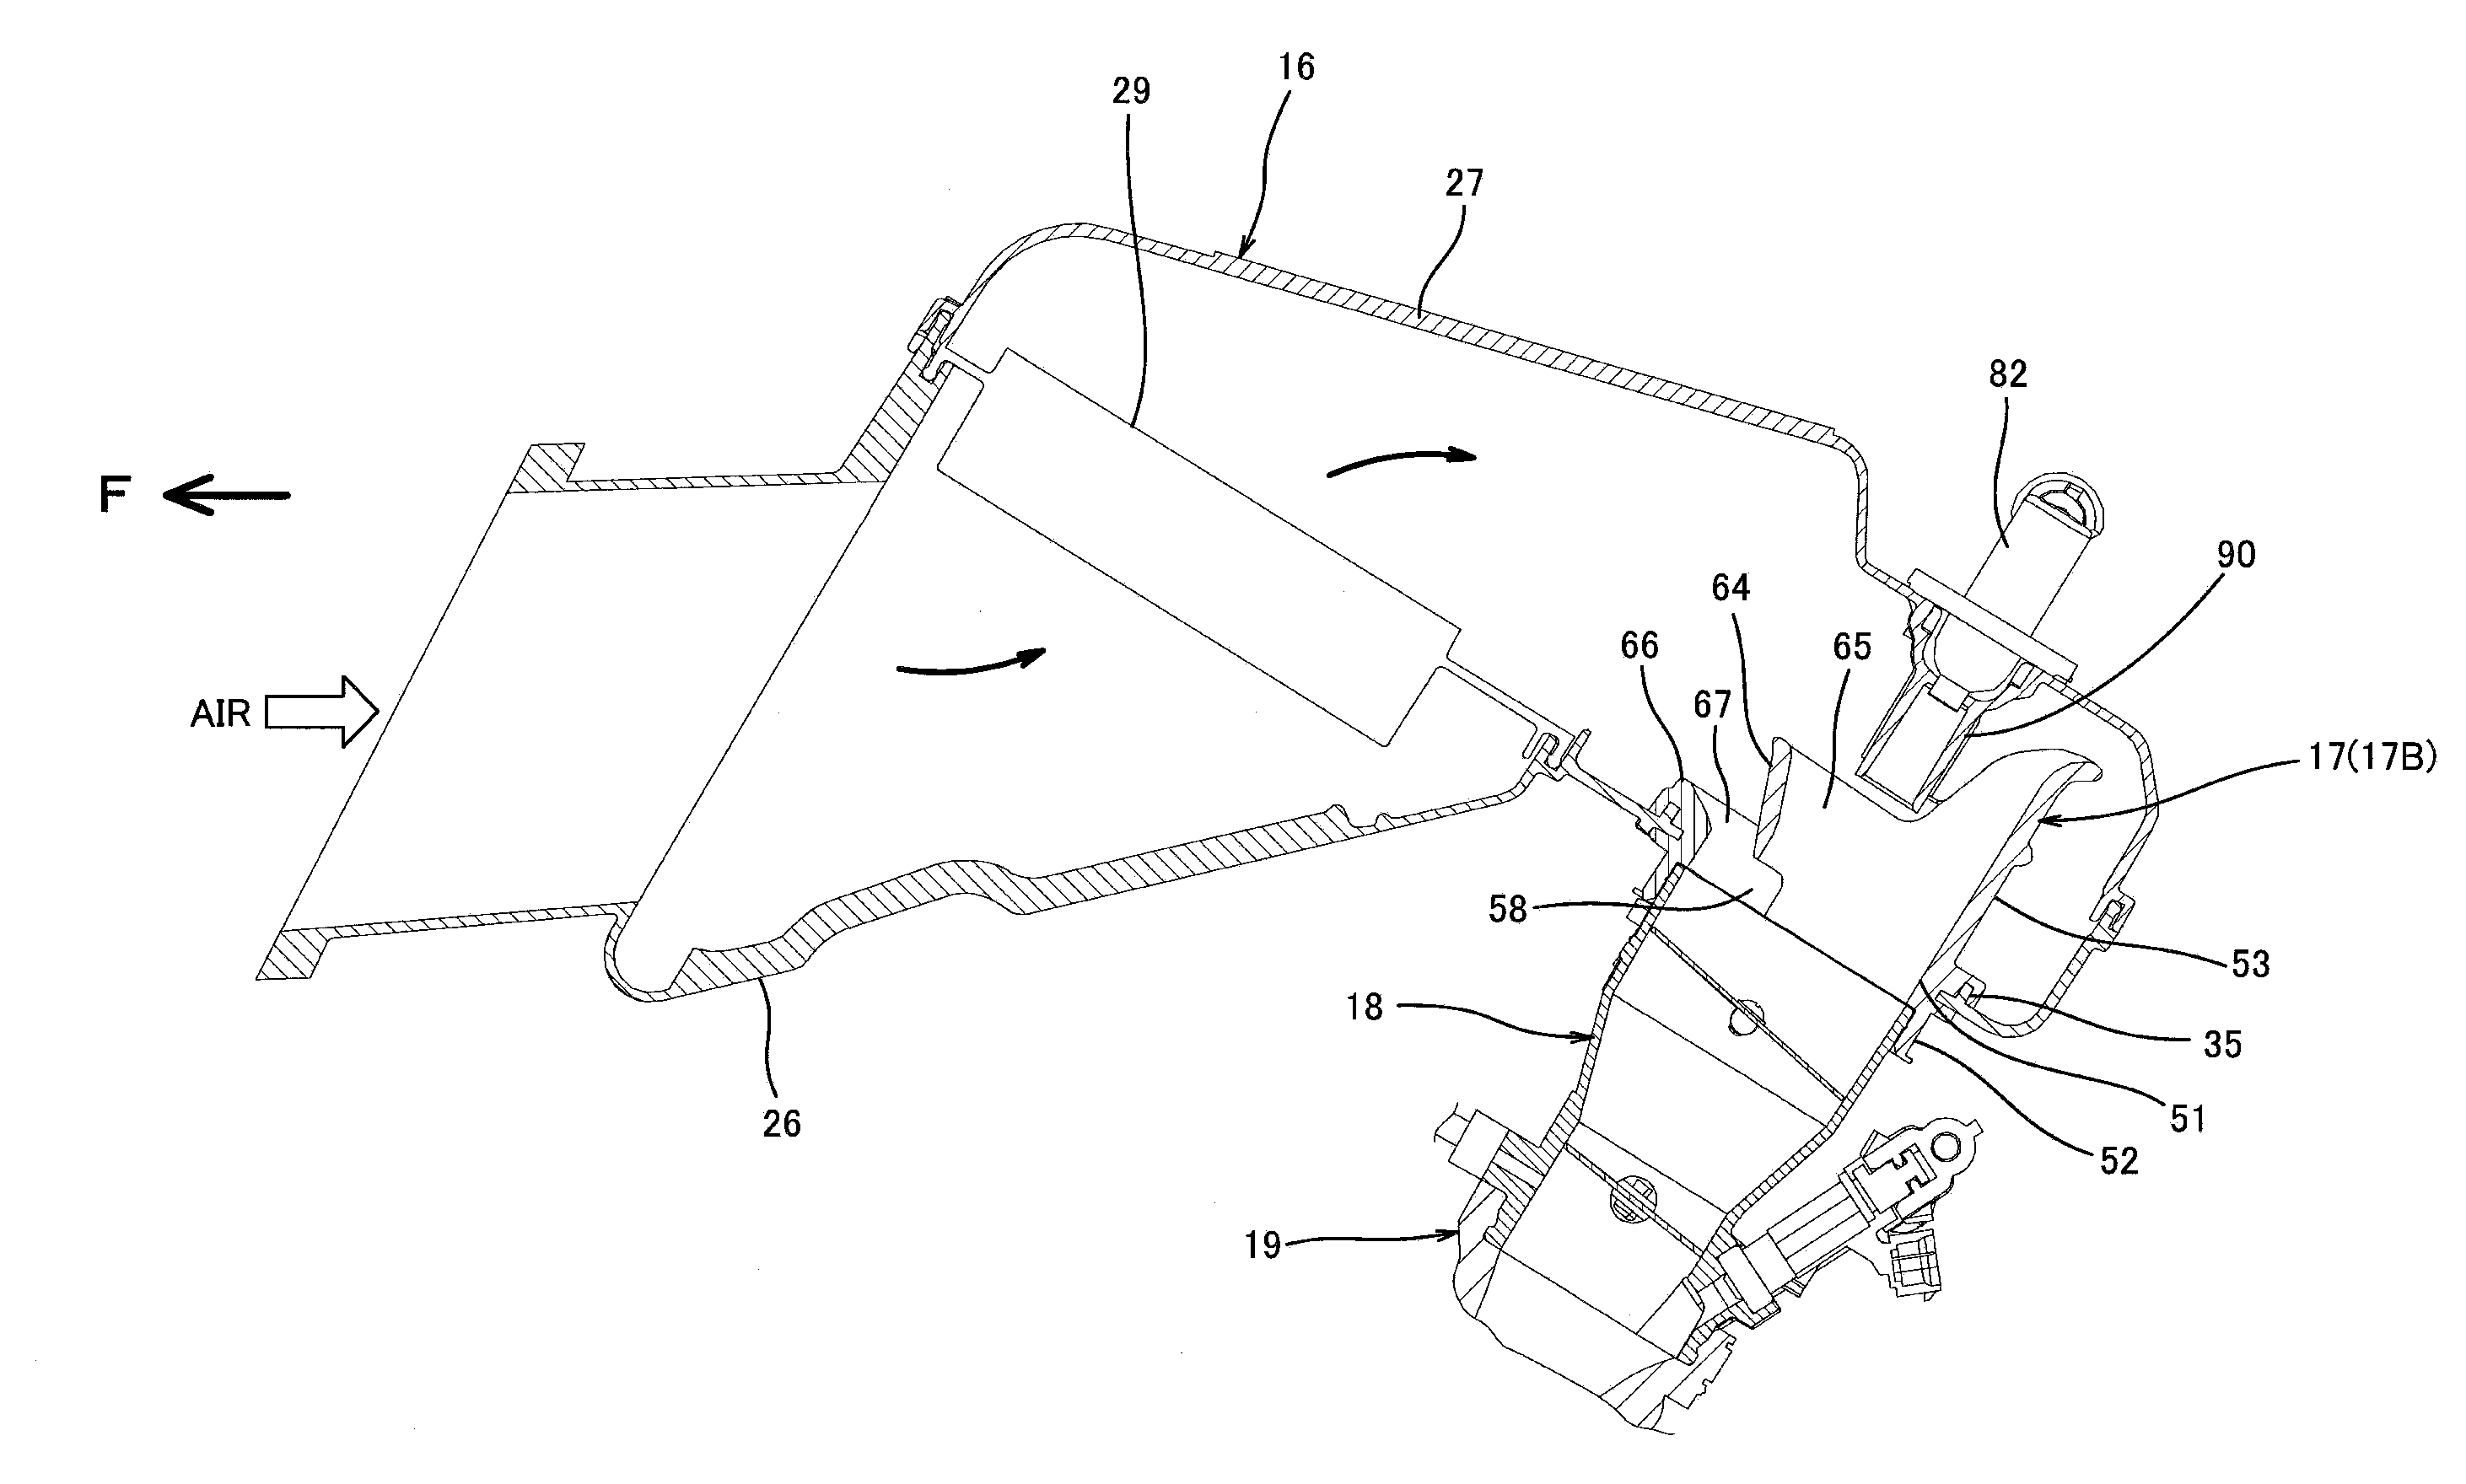 Air-intake duct and air-intake structure